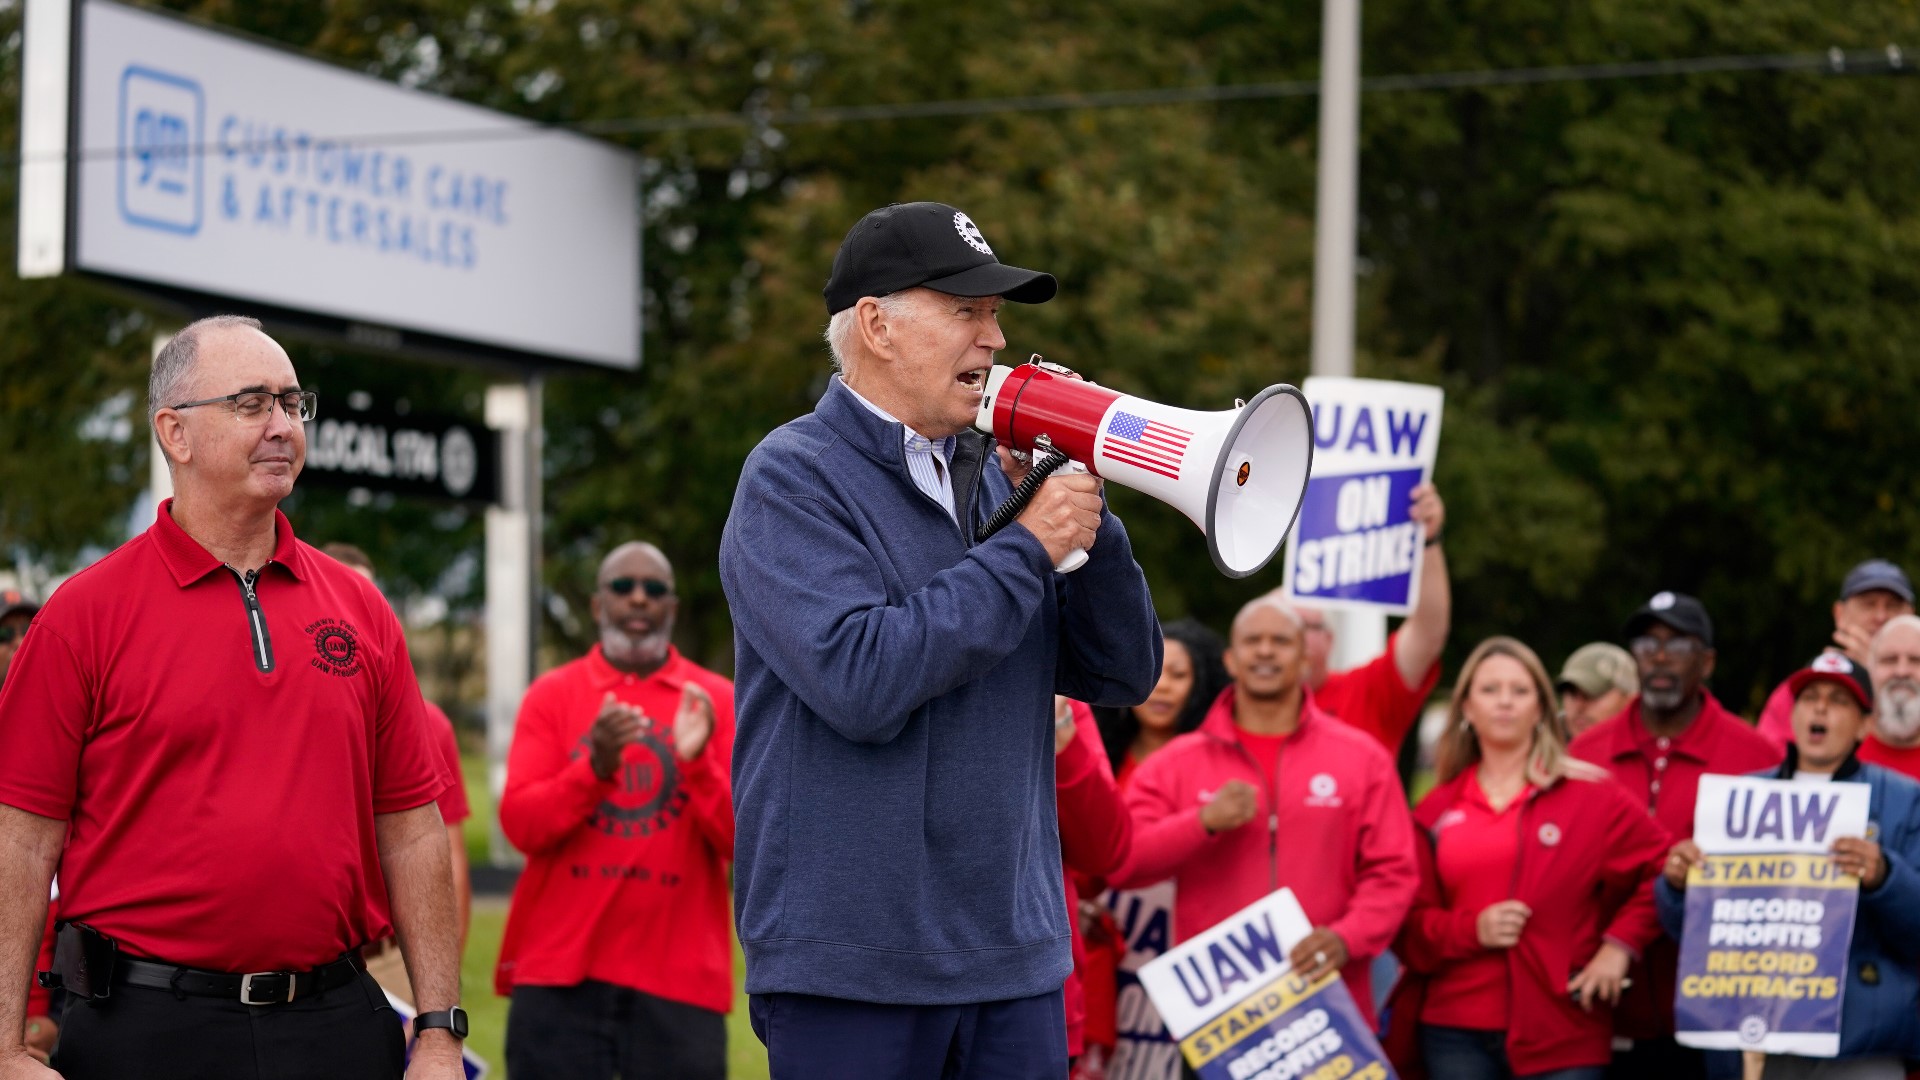 The President flew to Detroit Tuesday to show support for striking auto workers on the picket lines.